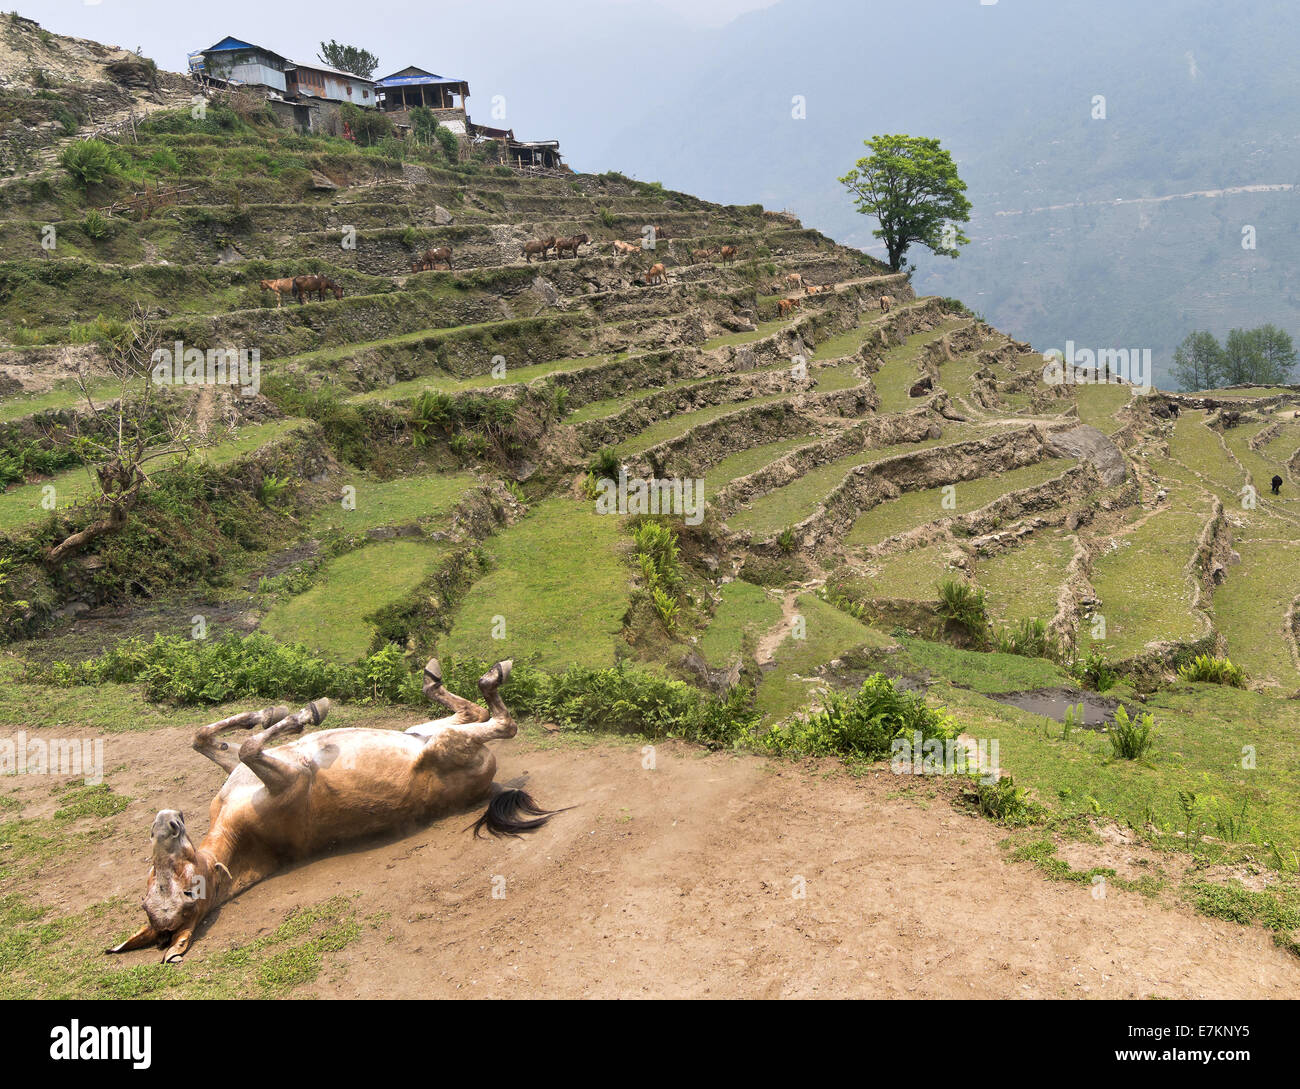 Views of the alpine pasture of horses in the mountains of Nepal. Stock Photo